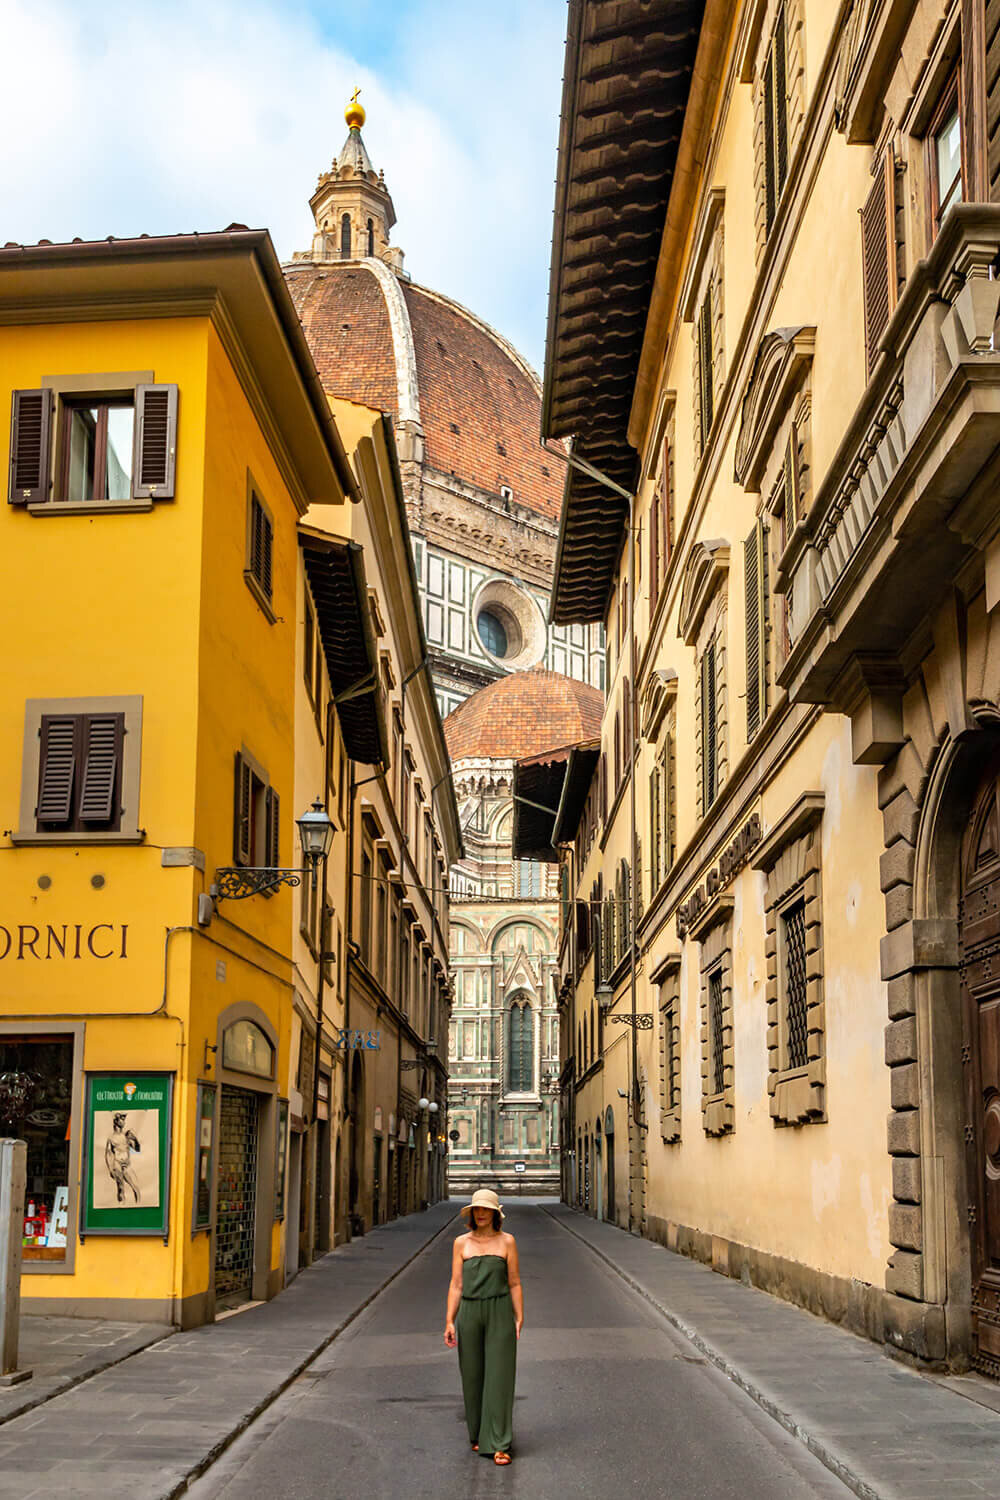 Another perspective of the Santa Maria del Fiore Cathedral